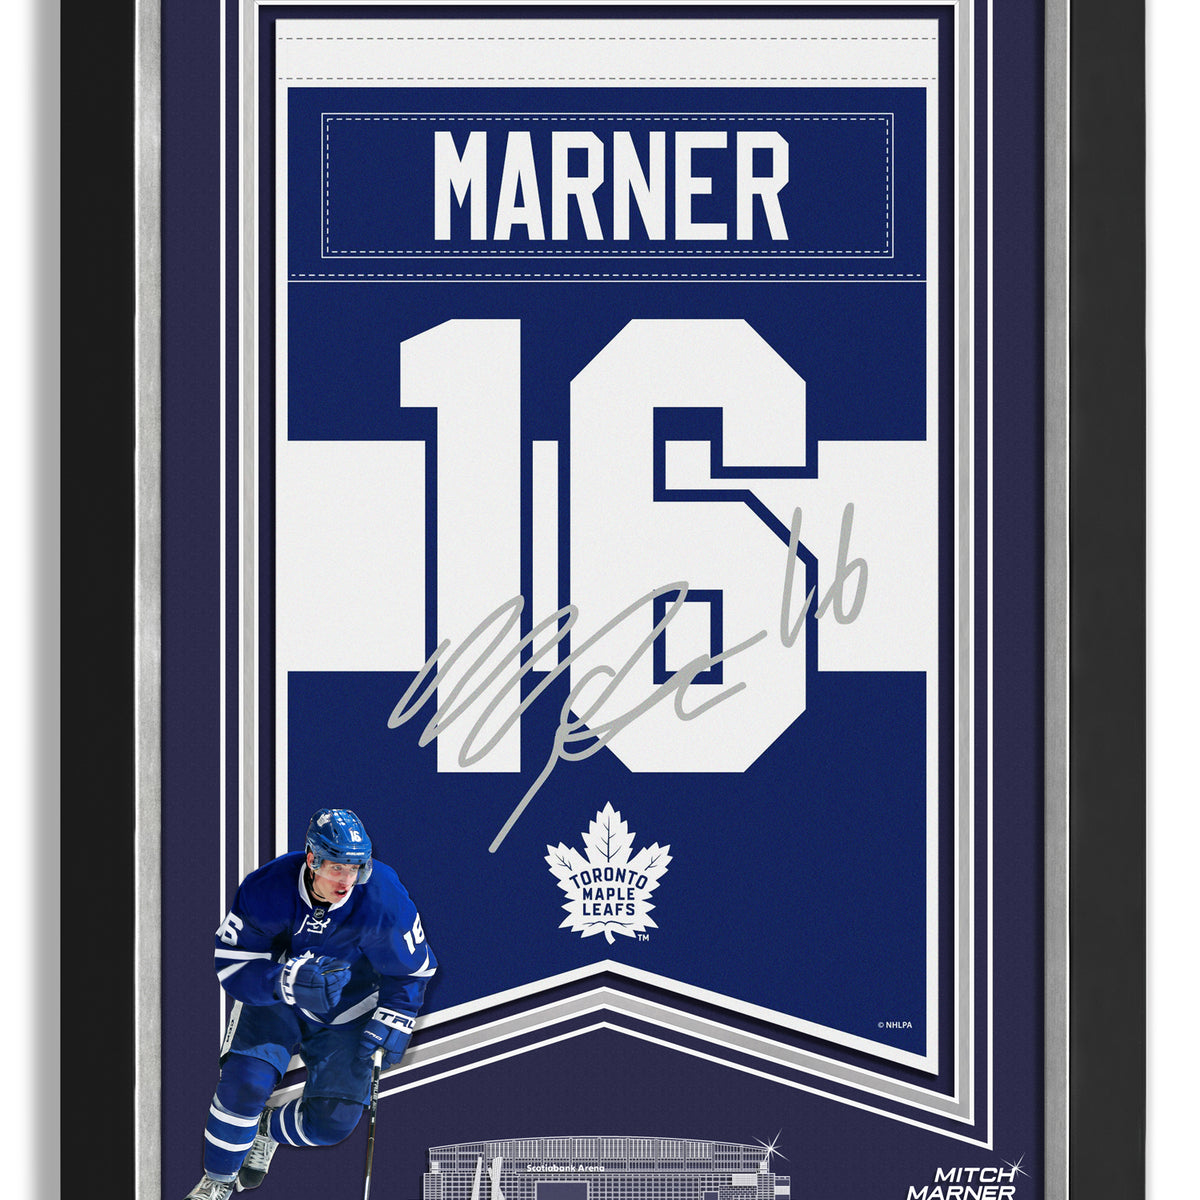 Mitch Marner Signed Toronto Maple Leafs Arenas Jersey